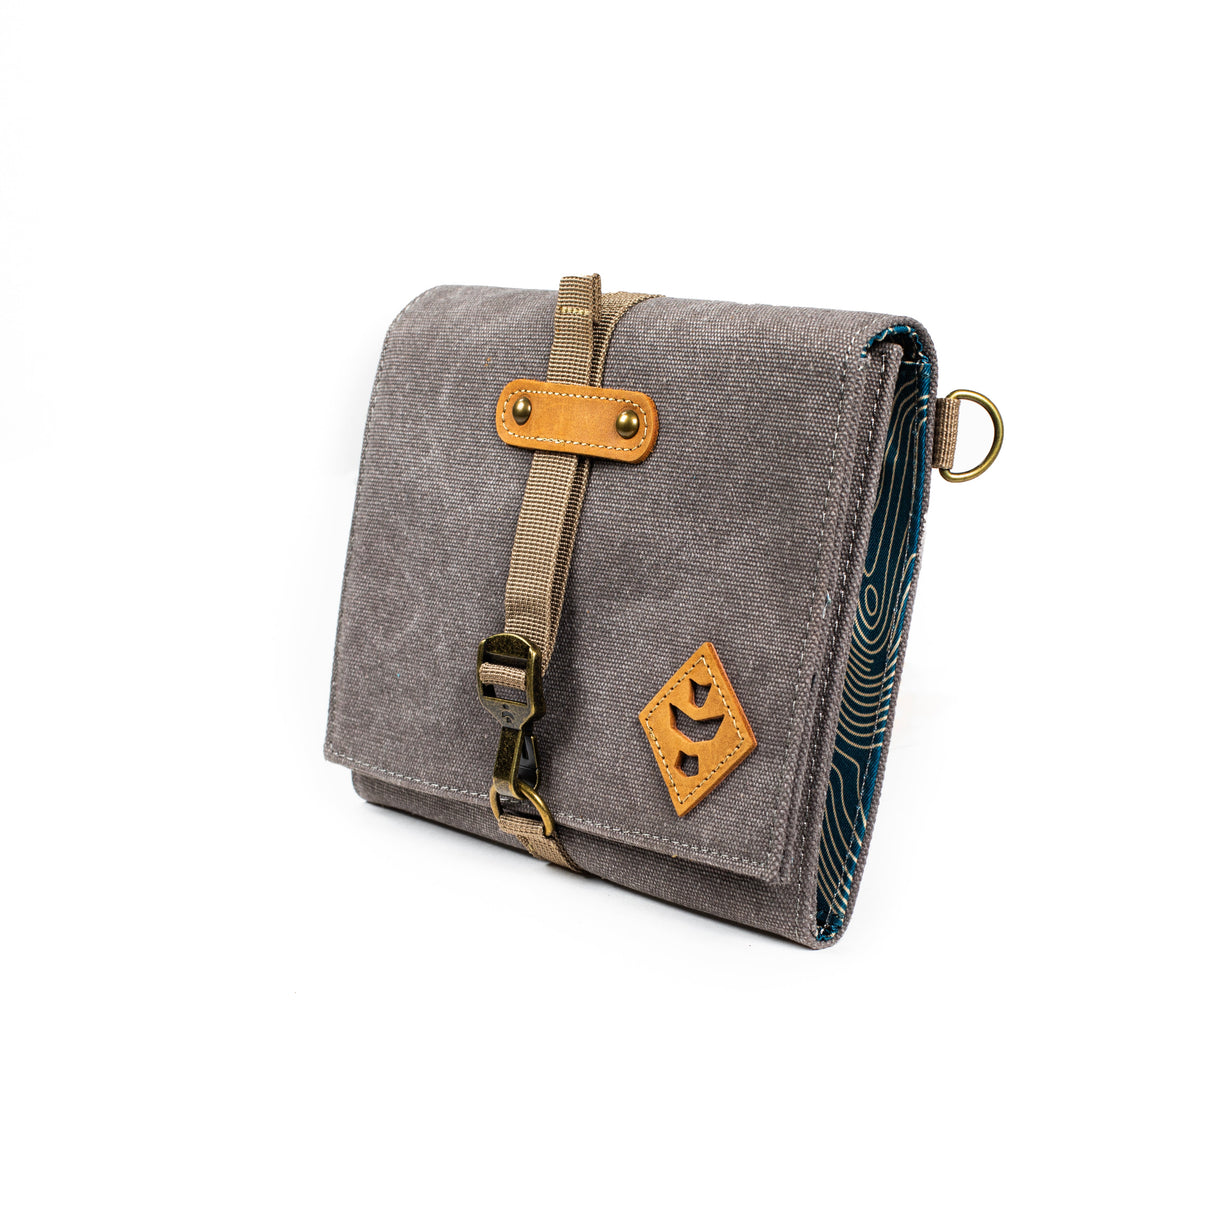 Revelry Supply The Rolling Kit - Smell Proof Gray Bag - Front Angle View